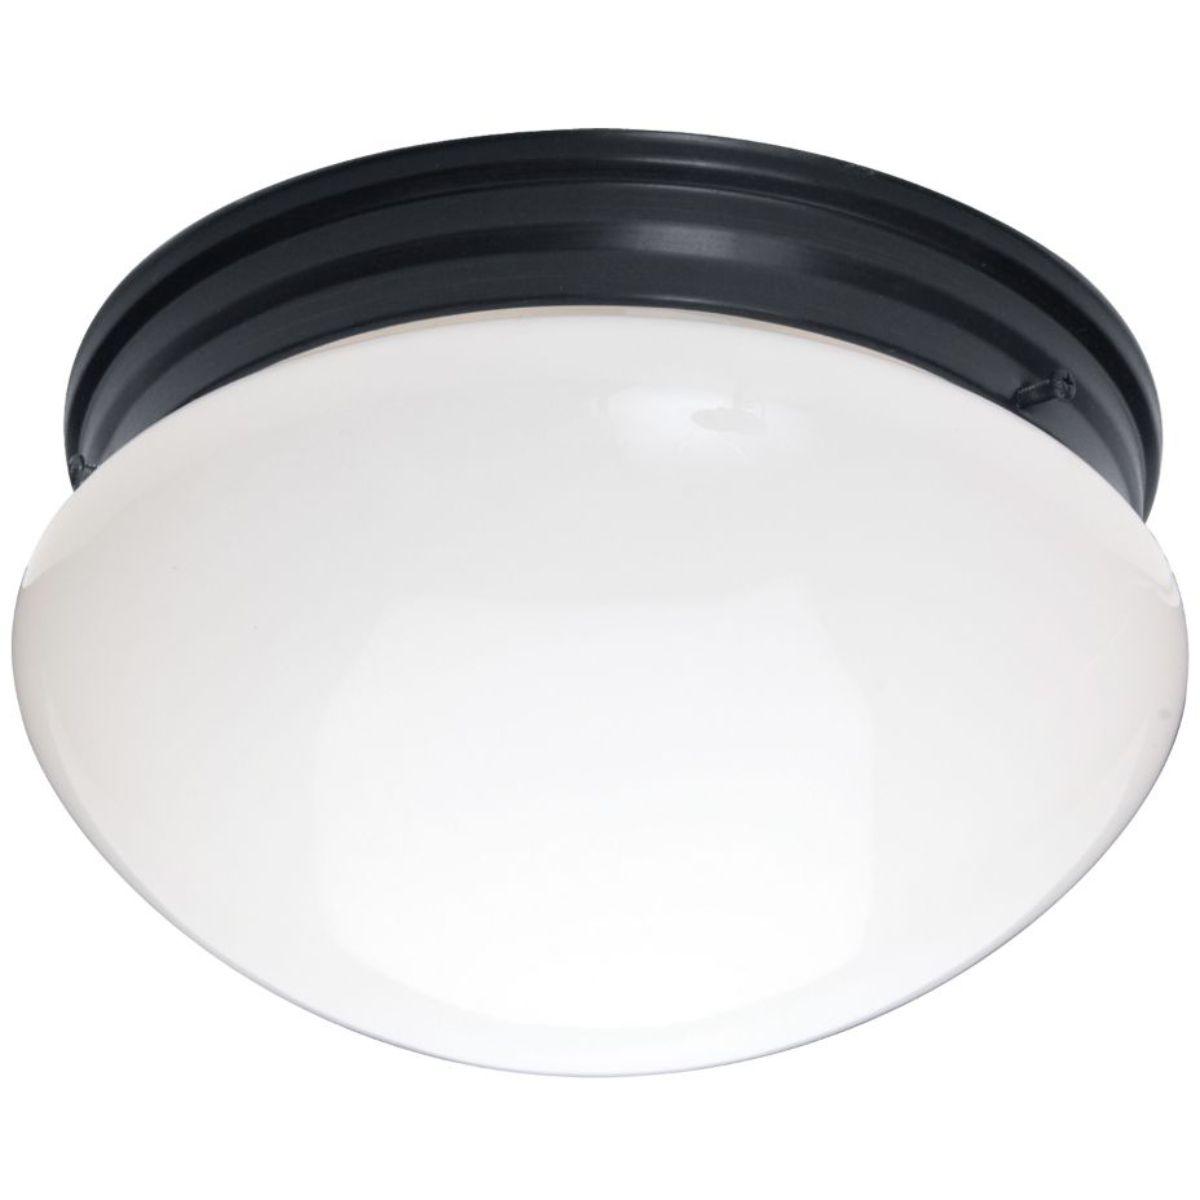 Essentials-588x 9 in. 2 Lights Ceiling Puff Light with clear glass